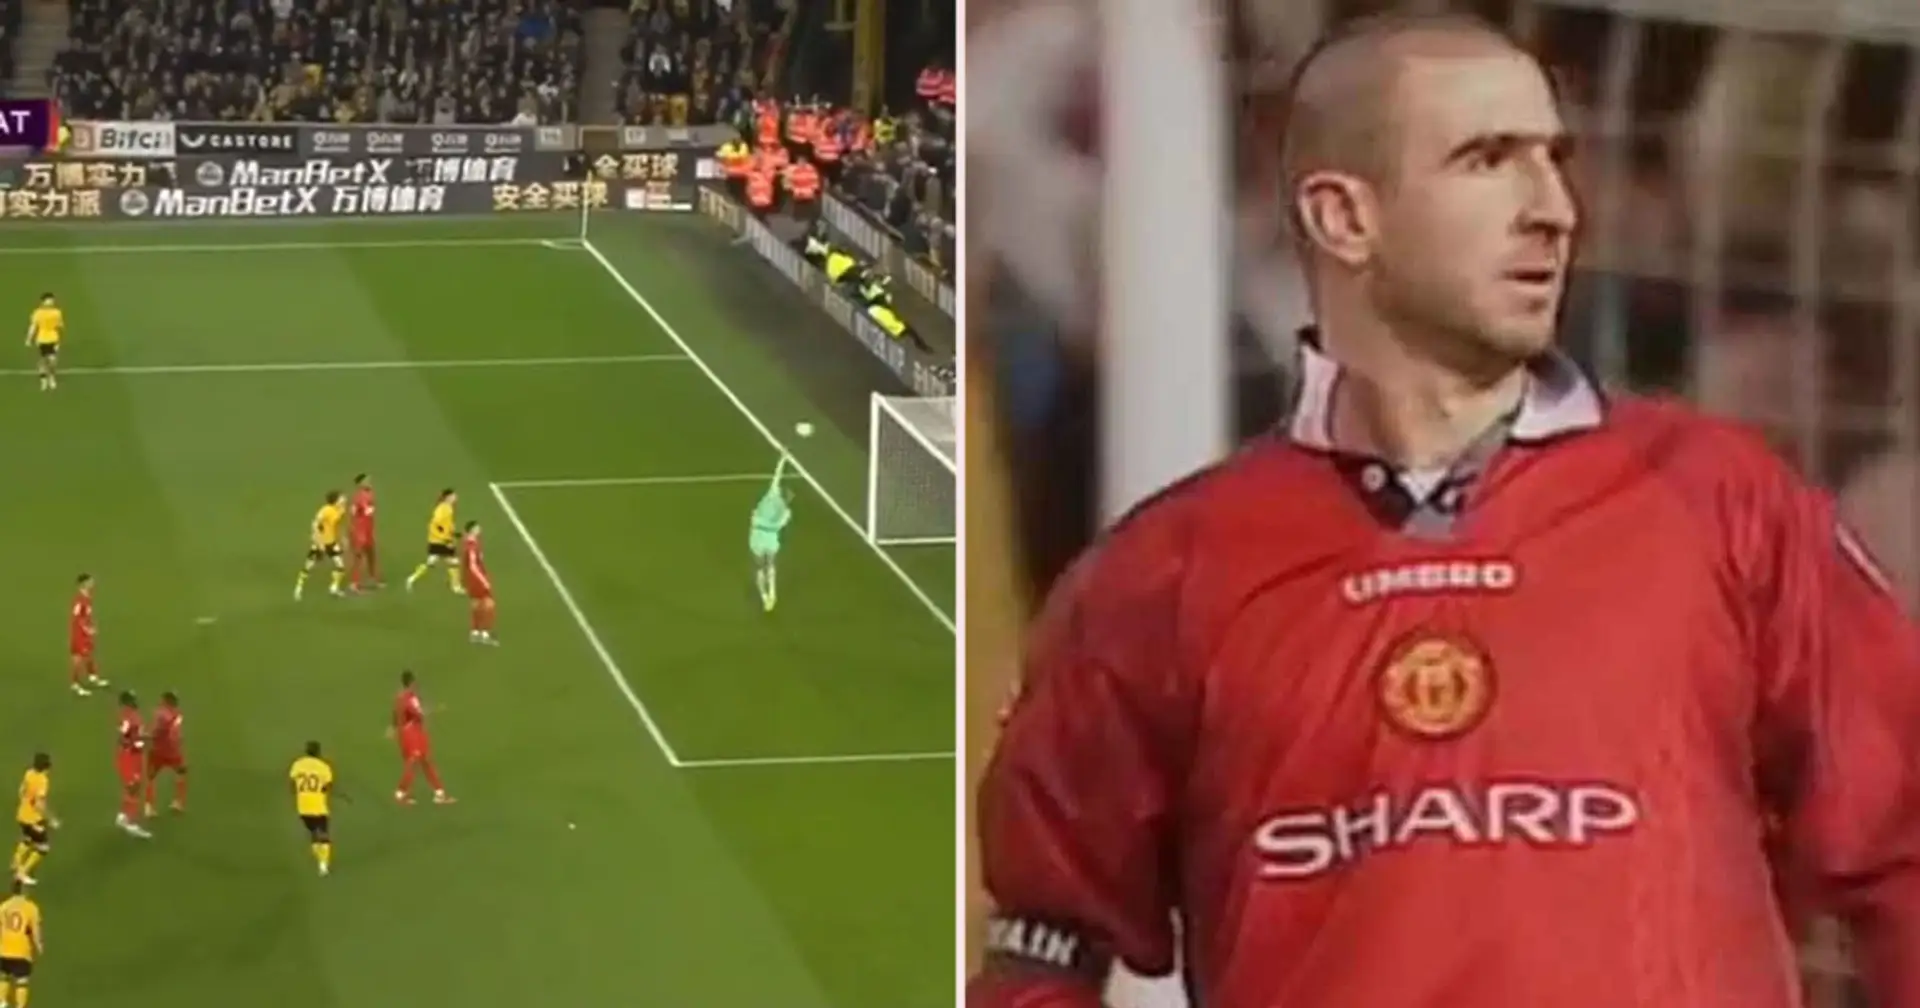 Ruben Neves scores 'Cantona-esque' goal vs Watford - Man United fans have just one thing to say